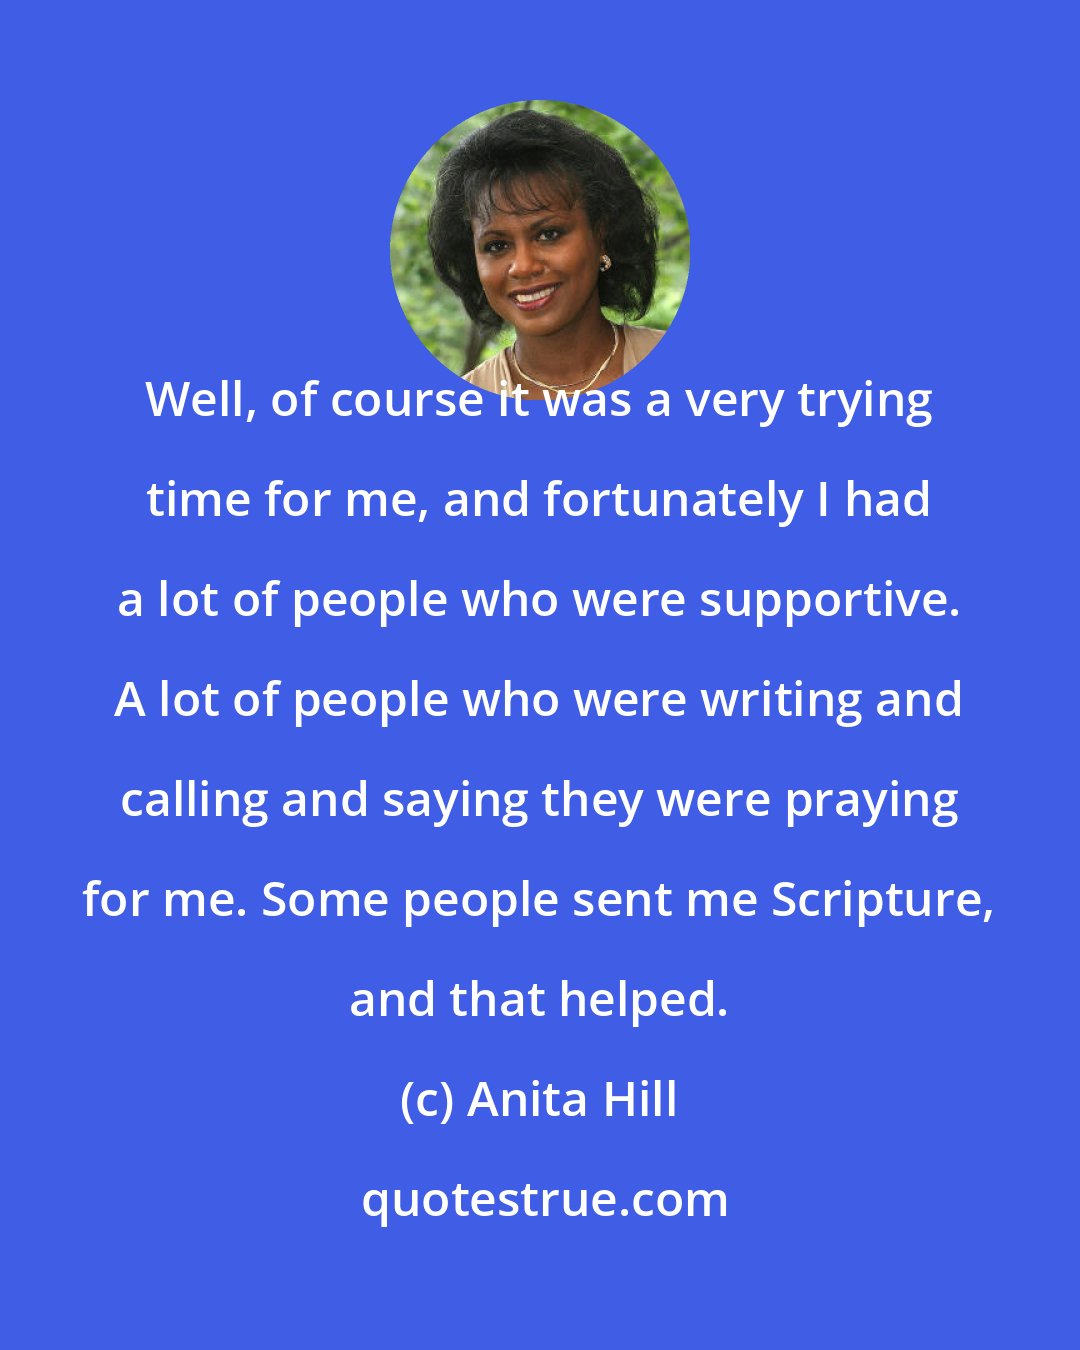 Anita Hill: Well, of course it was a very trying time for me, and fortunately I had a lot of people who were supportive. A lot of people who were writing and calling and saying they were praying for me. Some people sent me Scripture, and that helped.